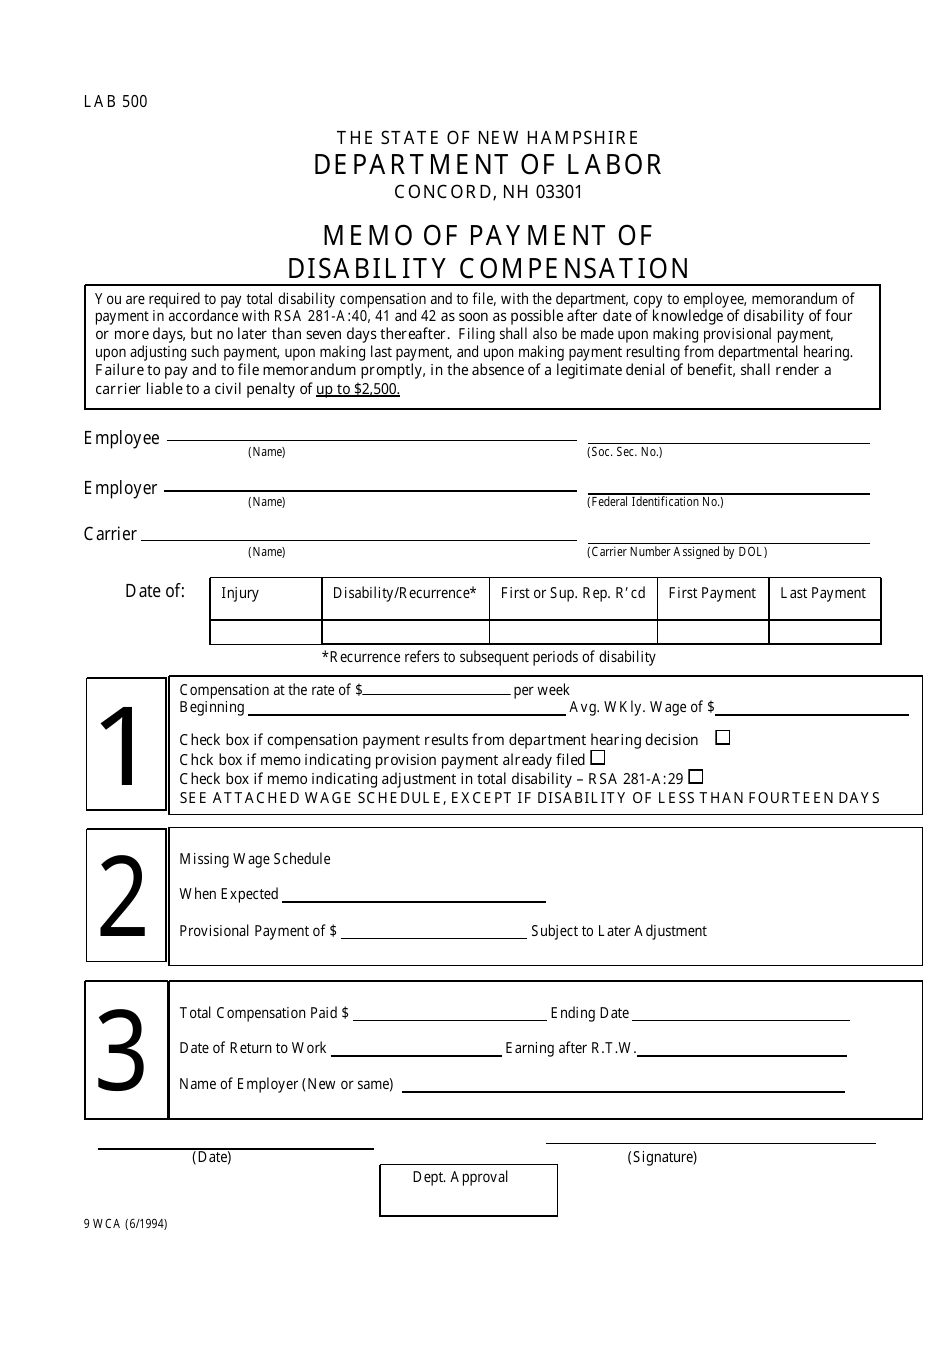 Form 9 WCA Memo of Payment of Disability Compensation - New Hampshire, Page 1